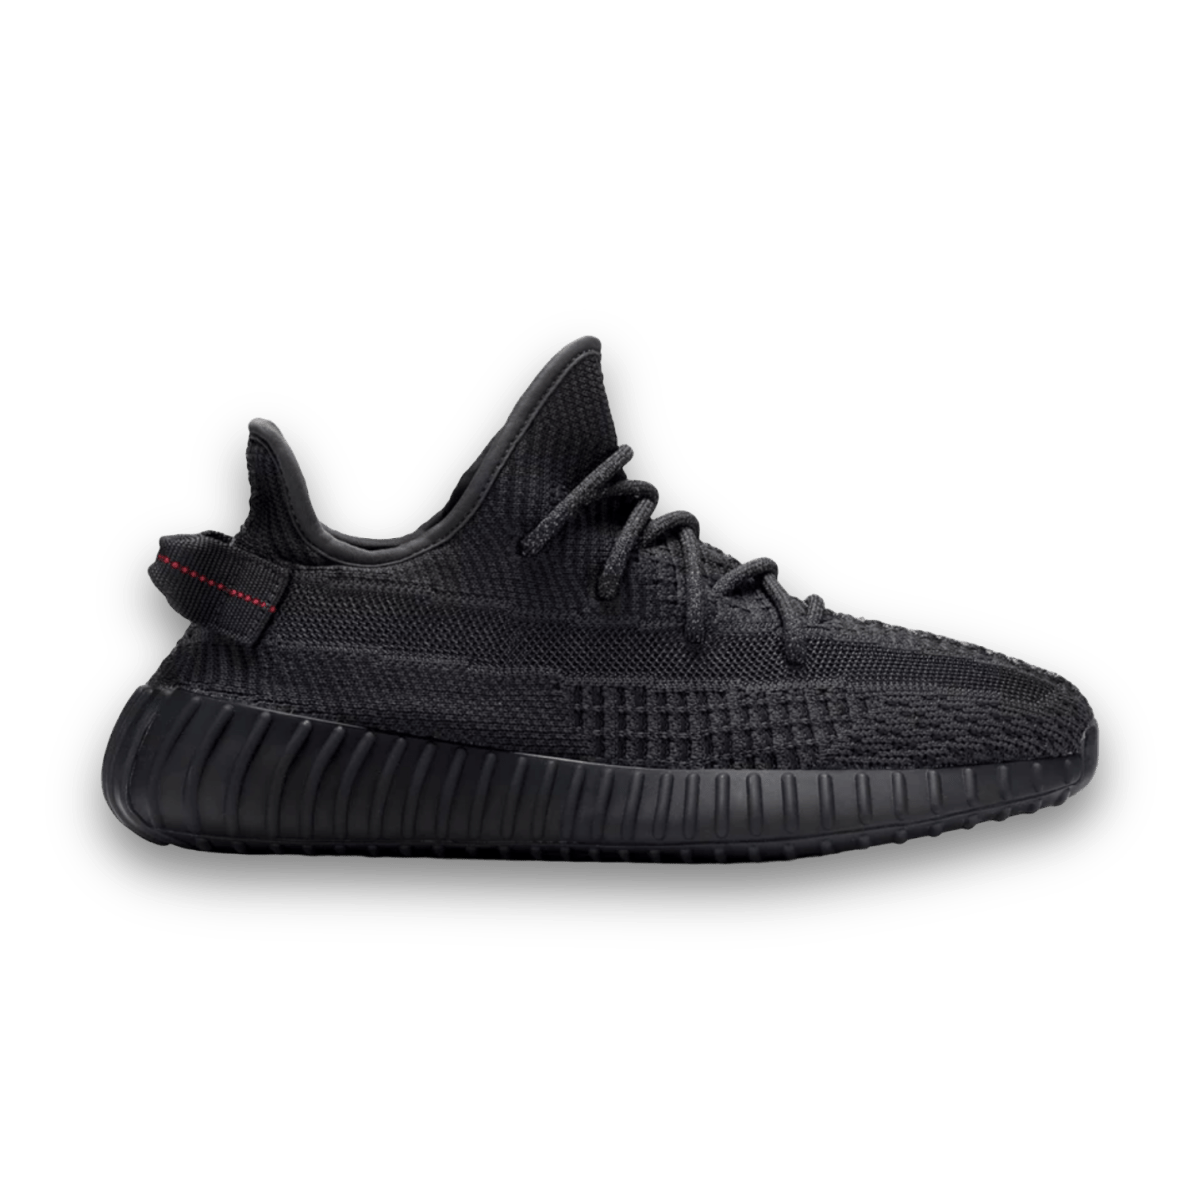 Yeezy Boost 350 V2 'Black Non-Reflective' - Low Sneaker - Yeezy - Jawns on Fire - sneakers